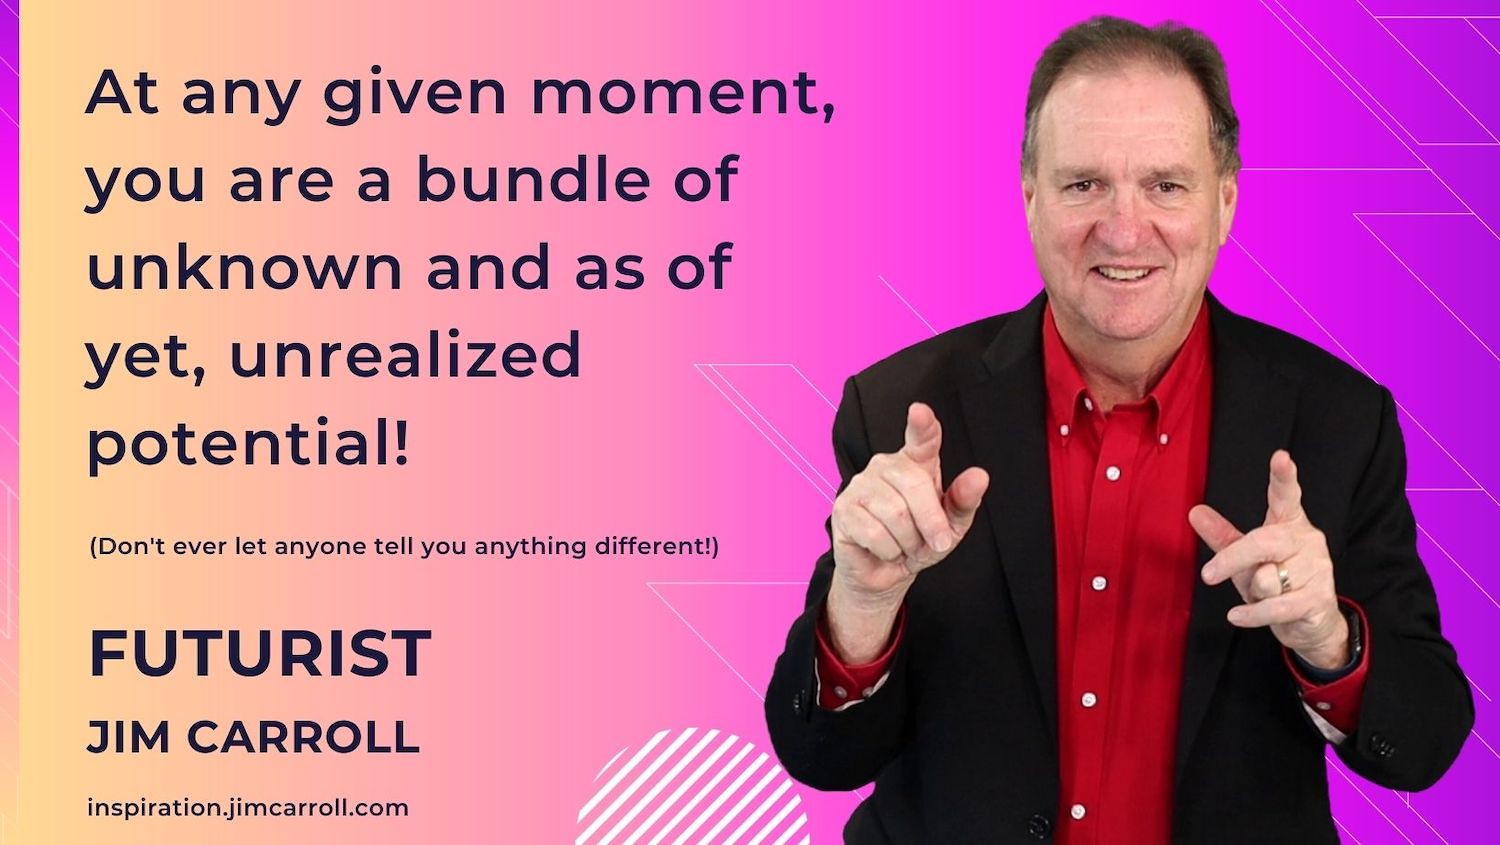 "At any given moment, you are a bundle of unknown and as of yet, unrealized potential!" - Futurist Jim Carroll